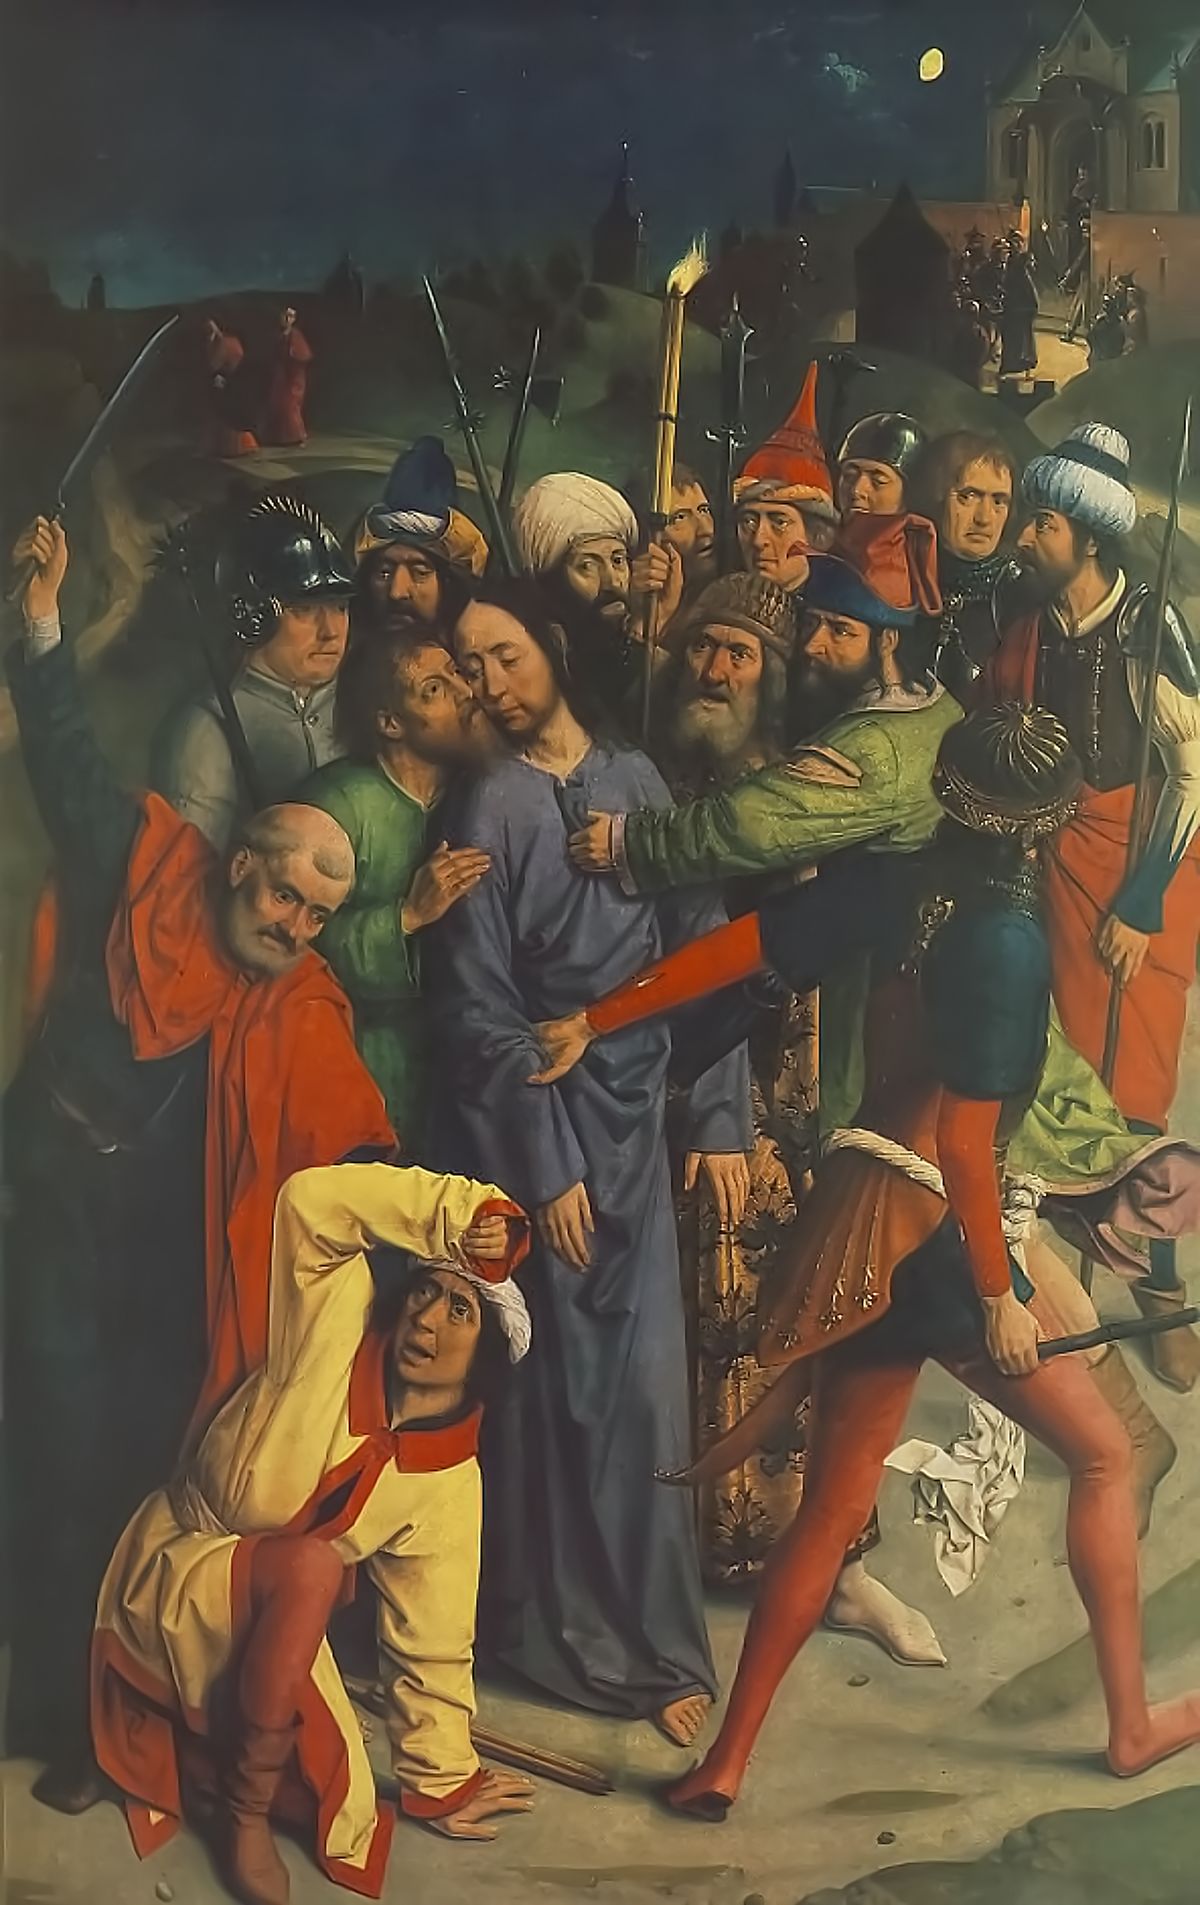 The Arrest of Christ with Kiss of Judas (1485) by Dieric Bouts - Public Domain Bible Painting